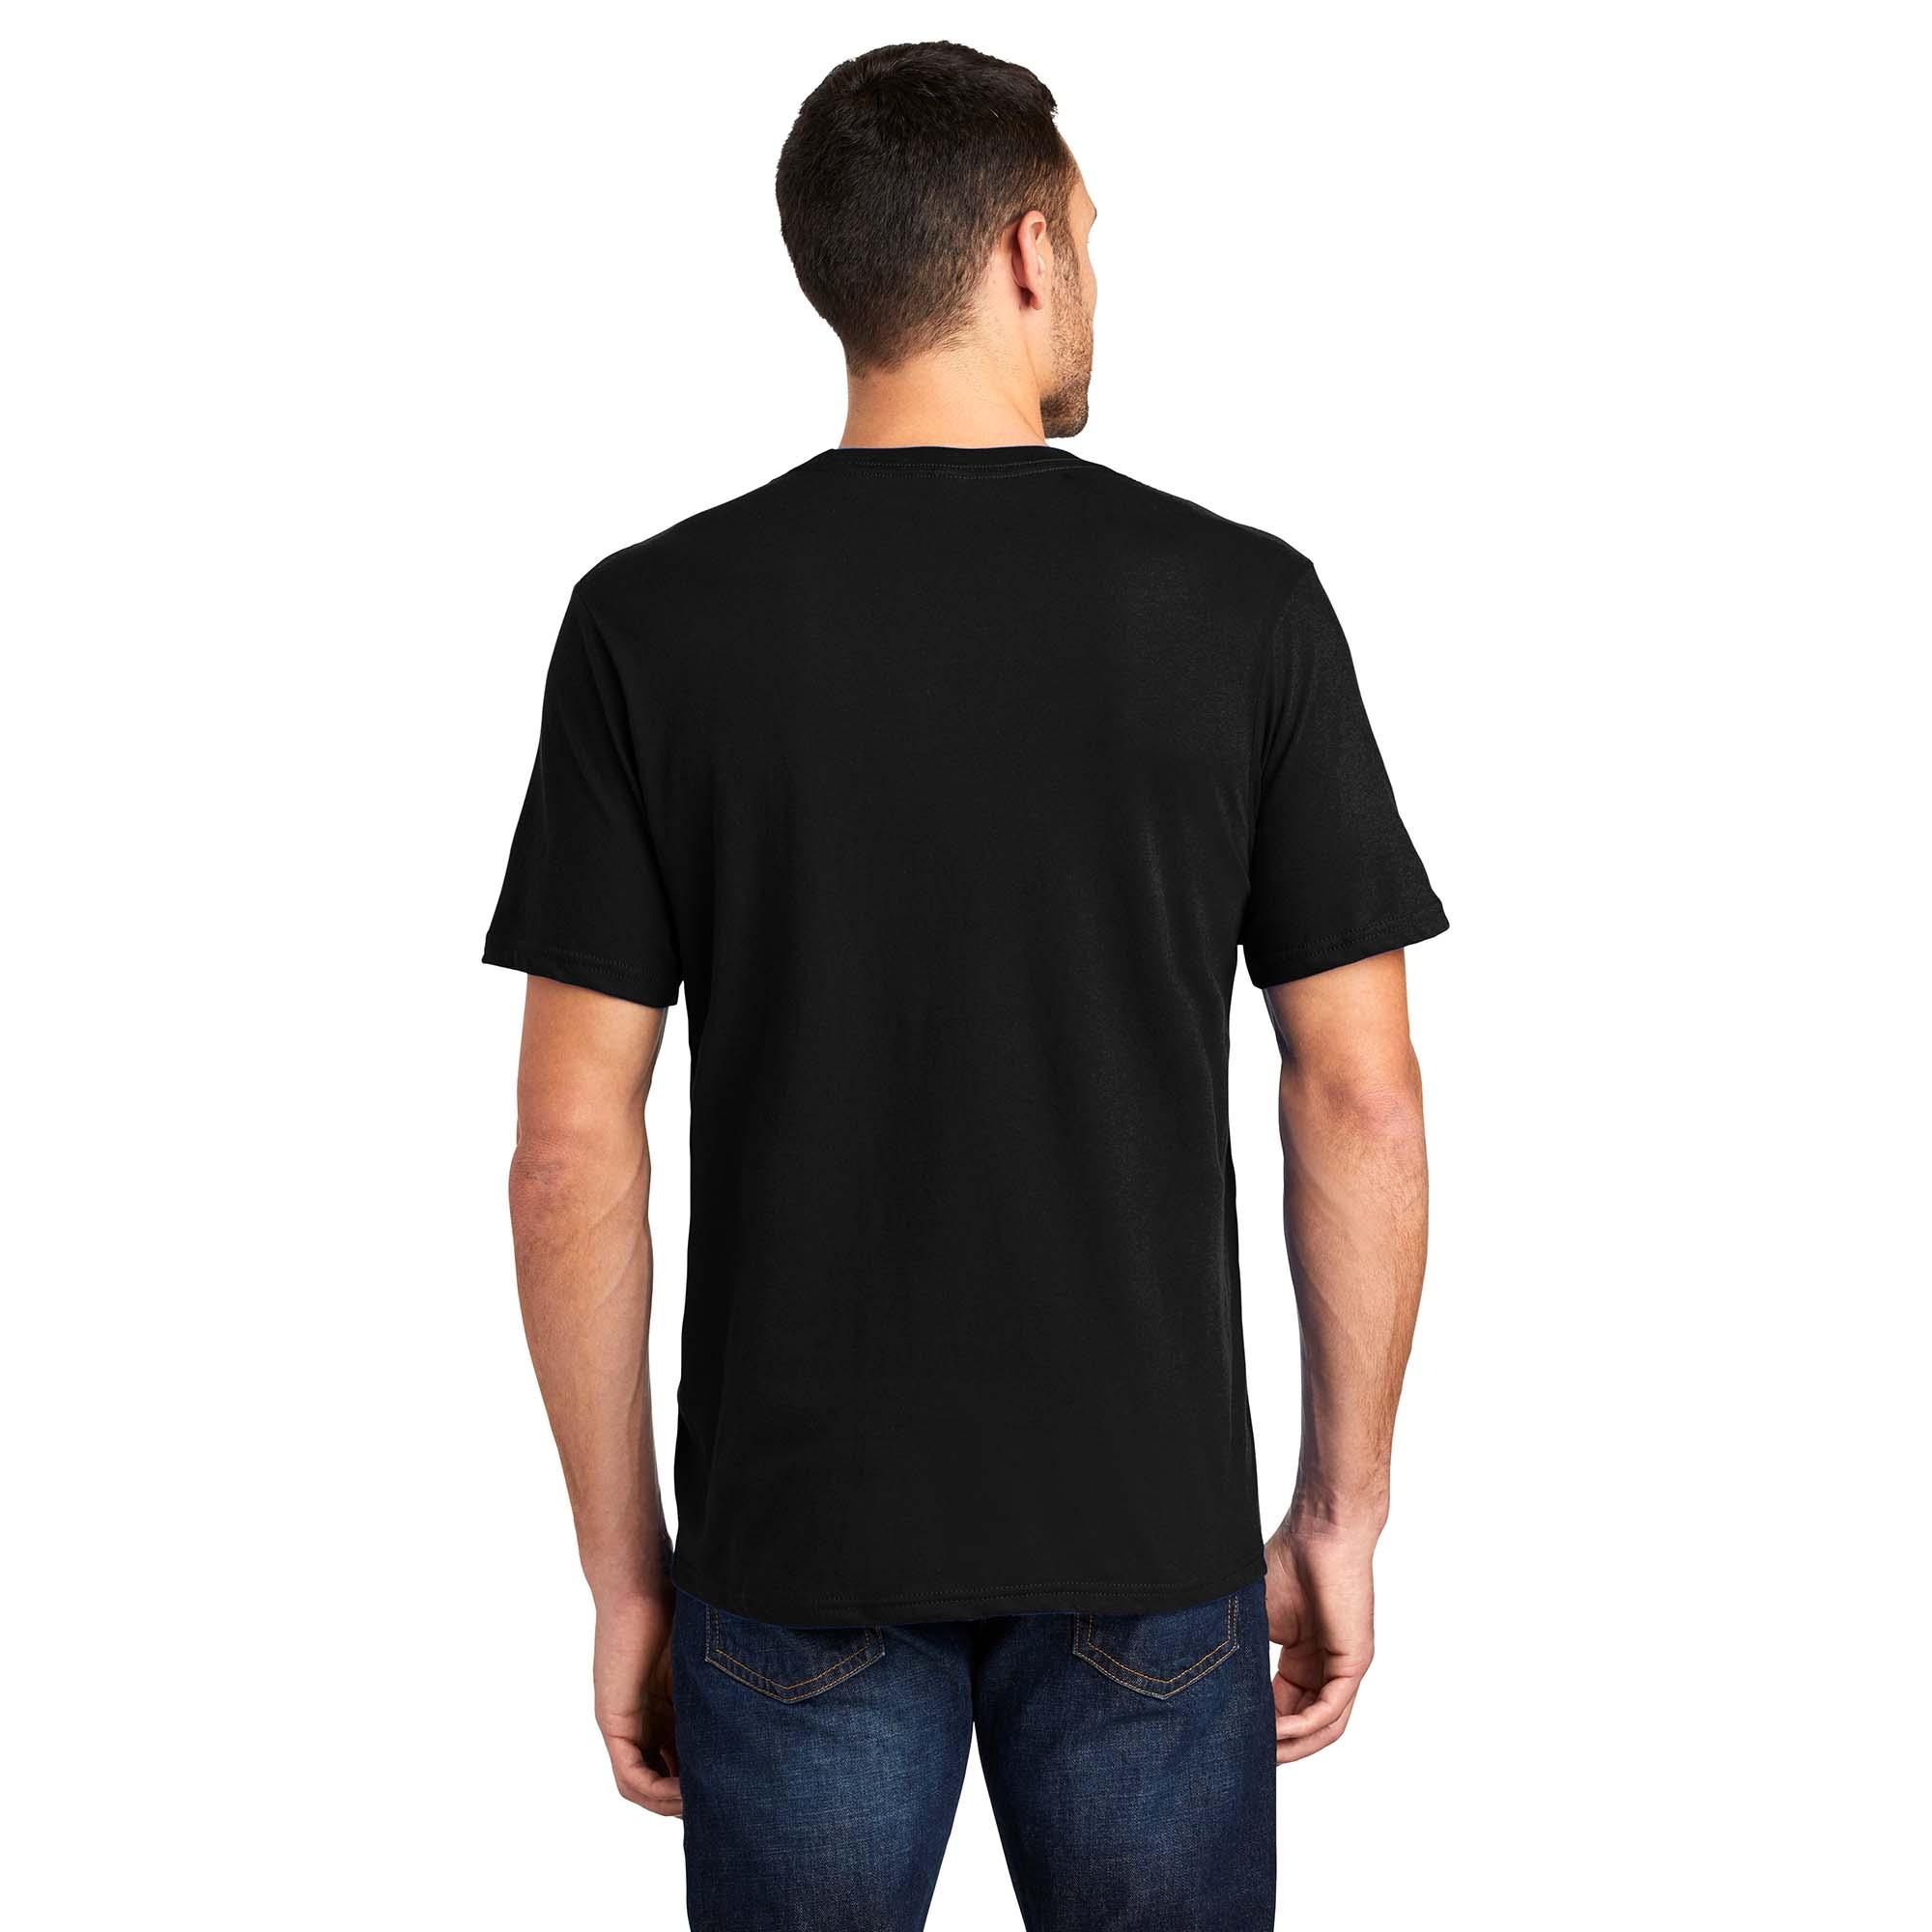 District DT6000 Very Important Tee - Black | Full Source